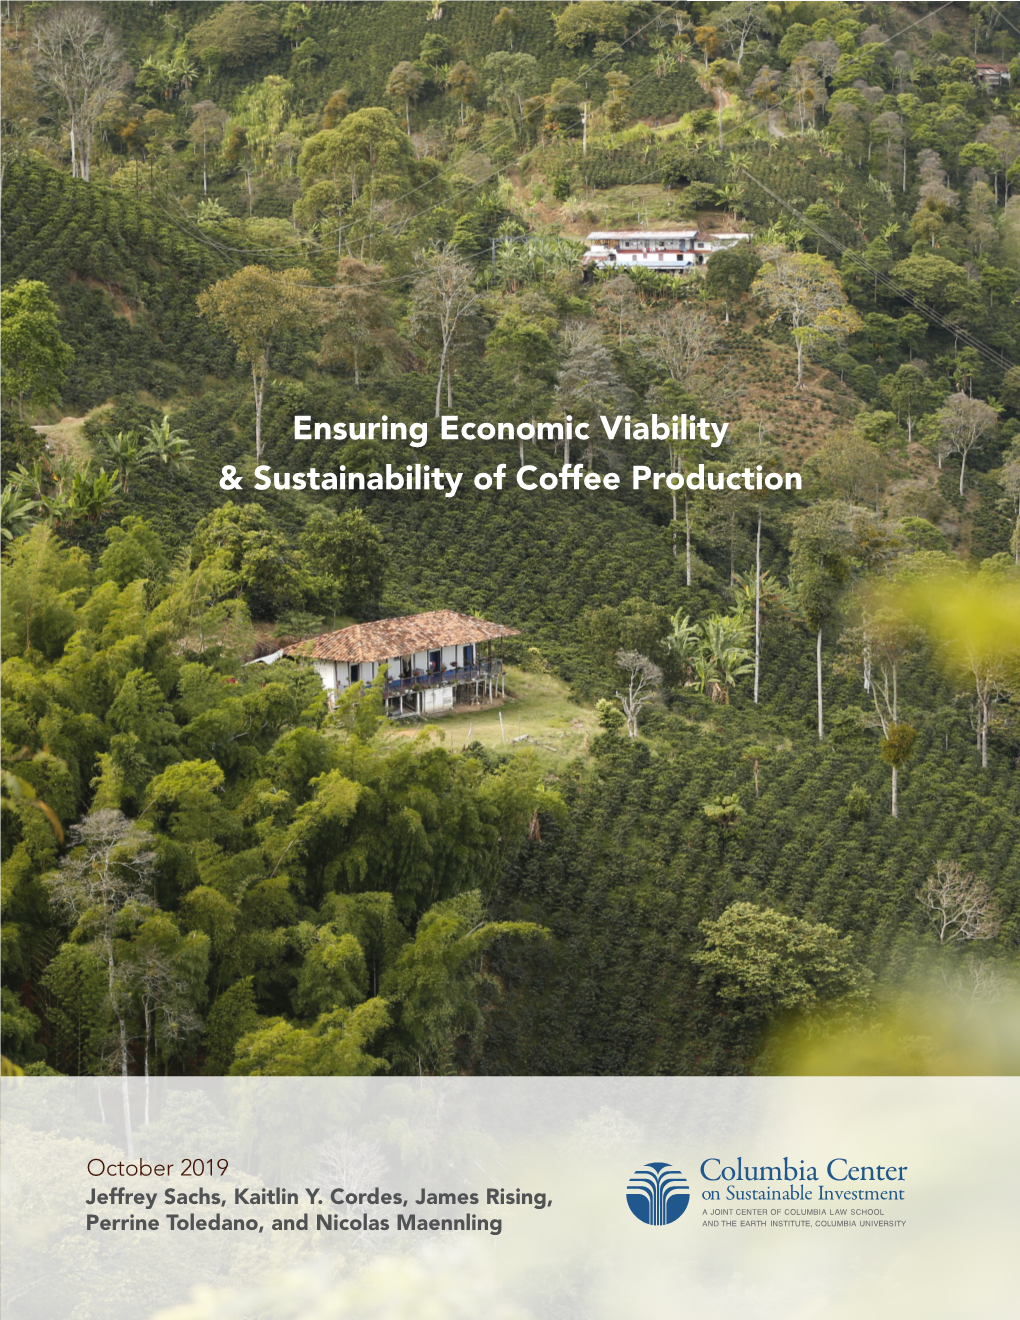 Ensuring Economic Viability and Sustainability of Coffee Production,” Columbia Center on Sustainable Investment (October 2019)